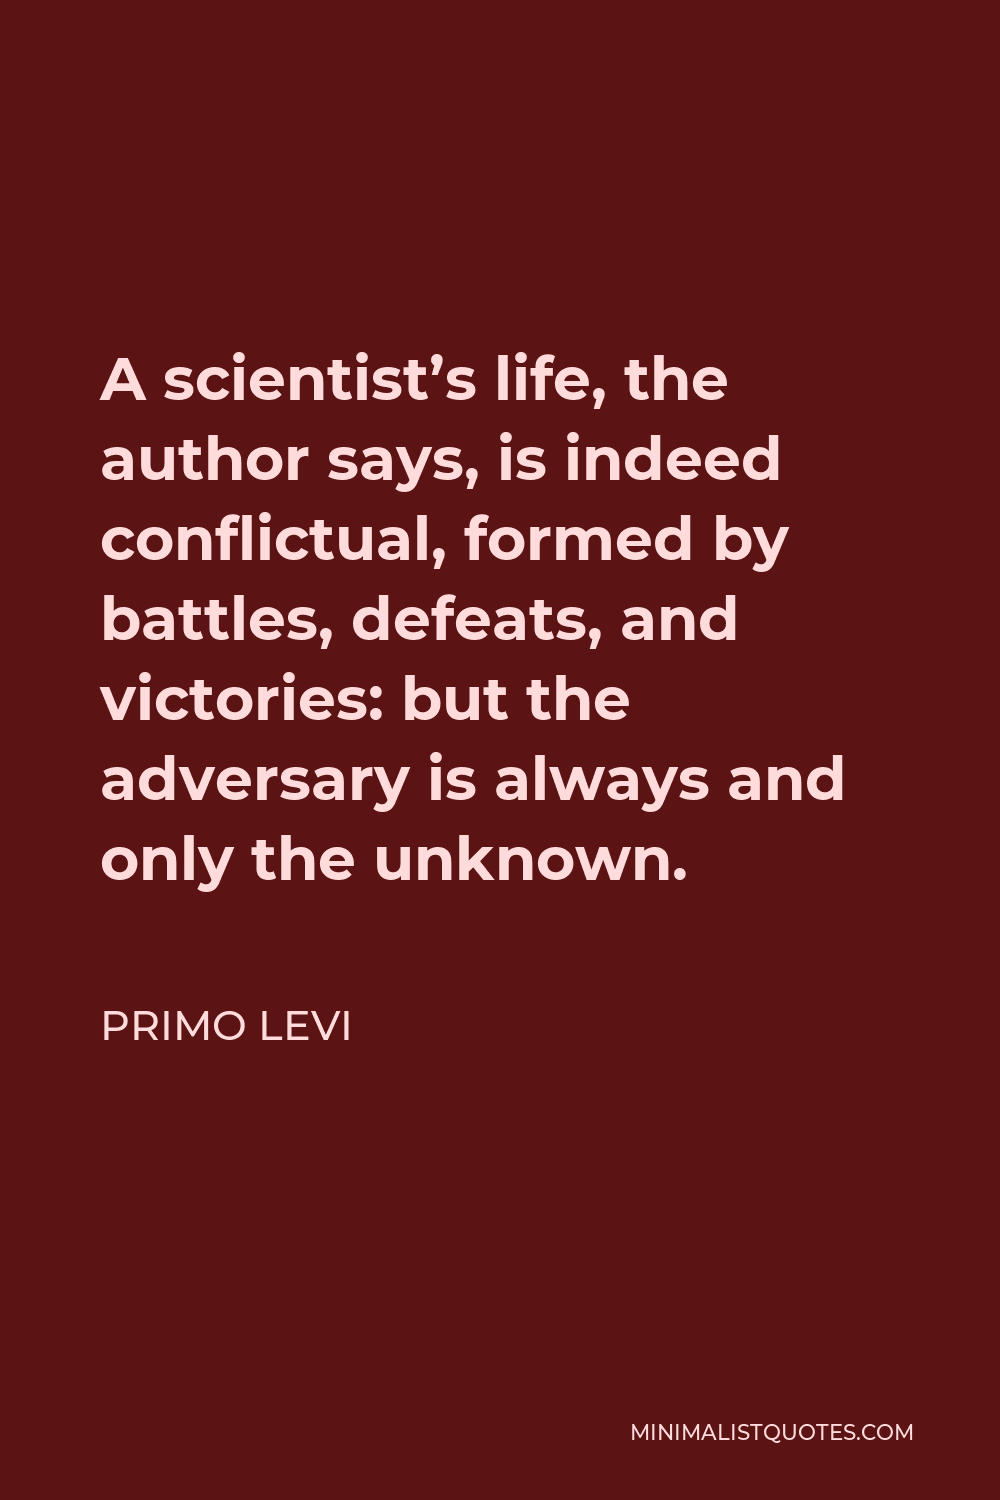 Primo Levi Quote - A scientist’s life, the author says, is indeed conflictual, formed by battles, defeats, and victories: but the adversary is always and only the unknown.